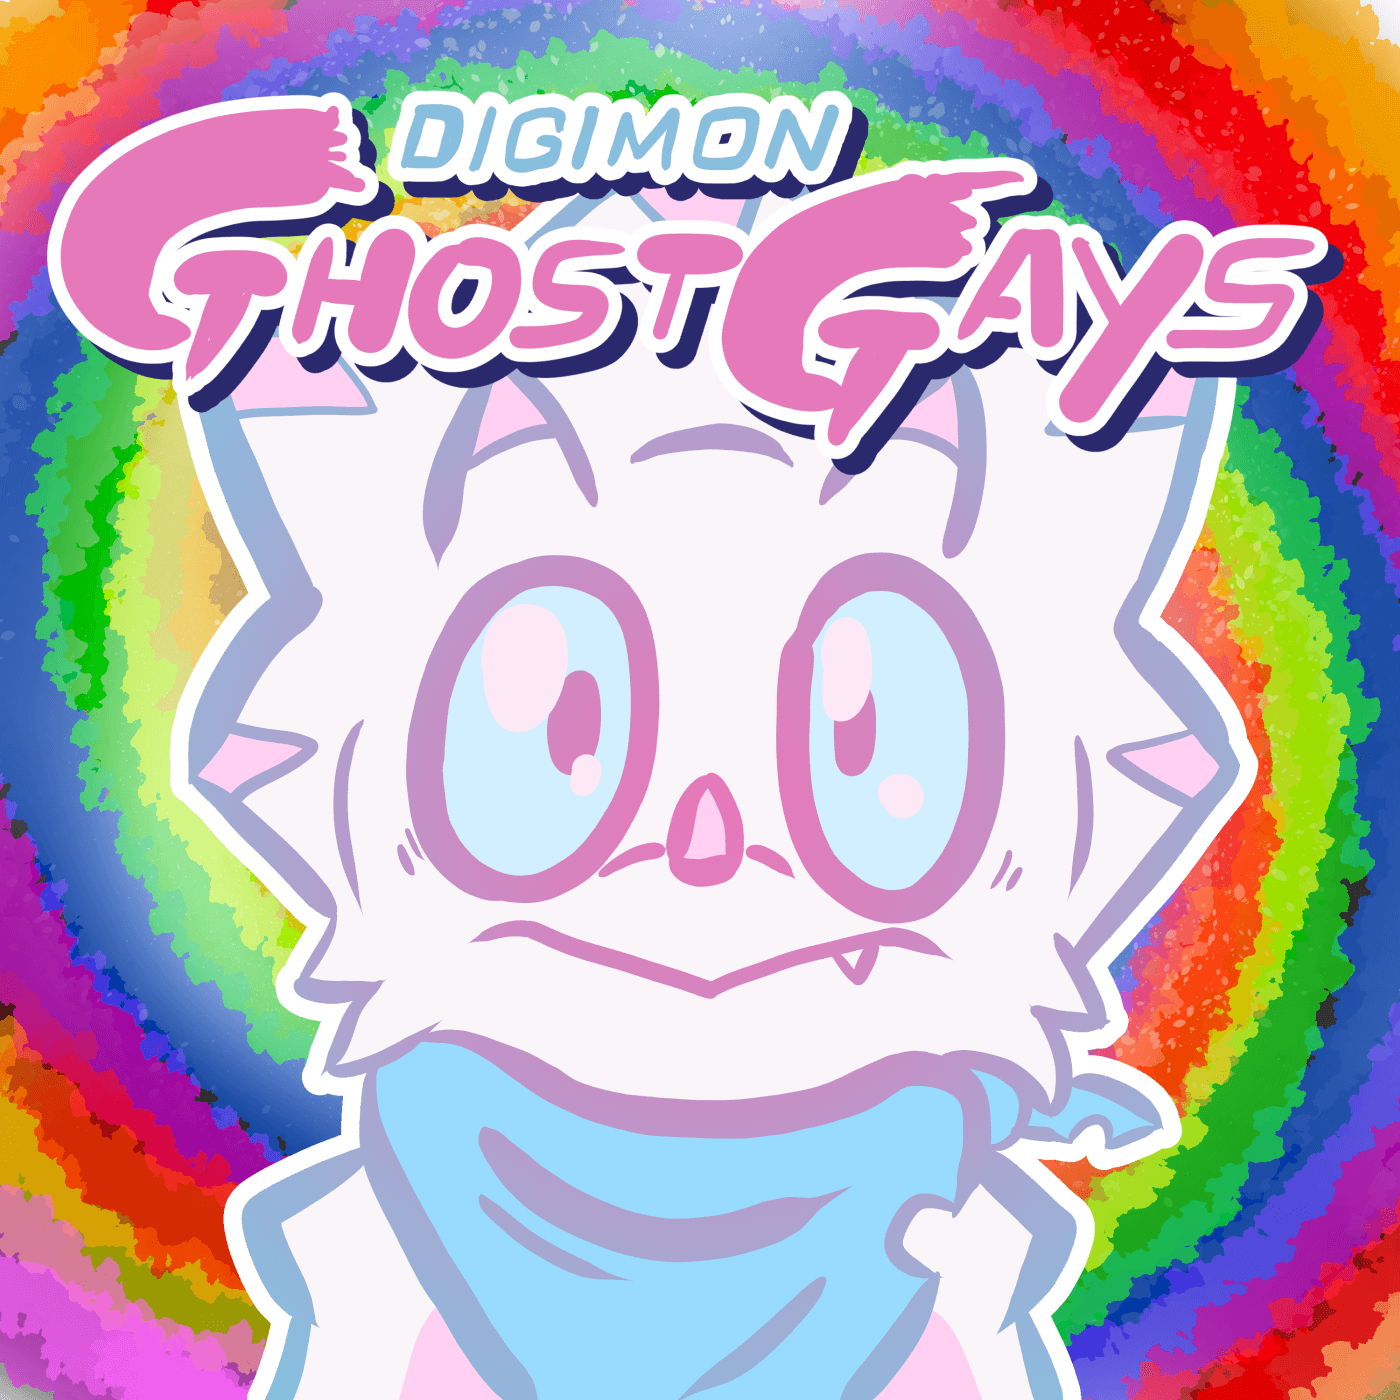 Ghost Gayest pt 1 – Two Depression Caves in One Episode